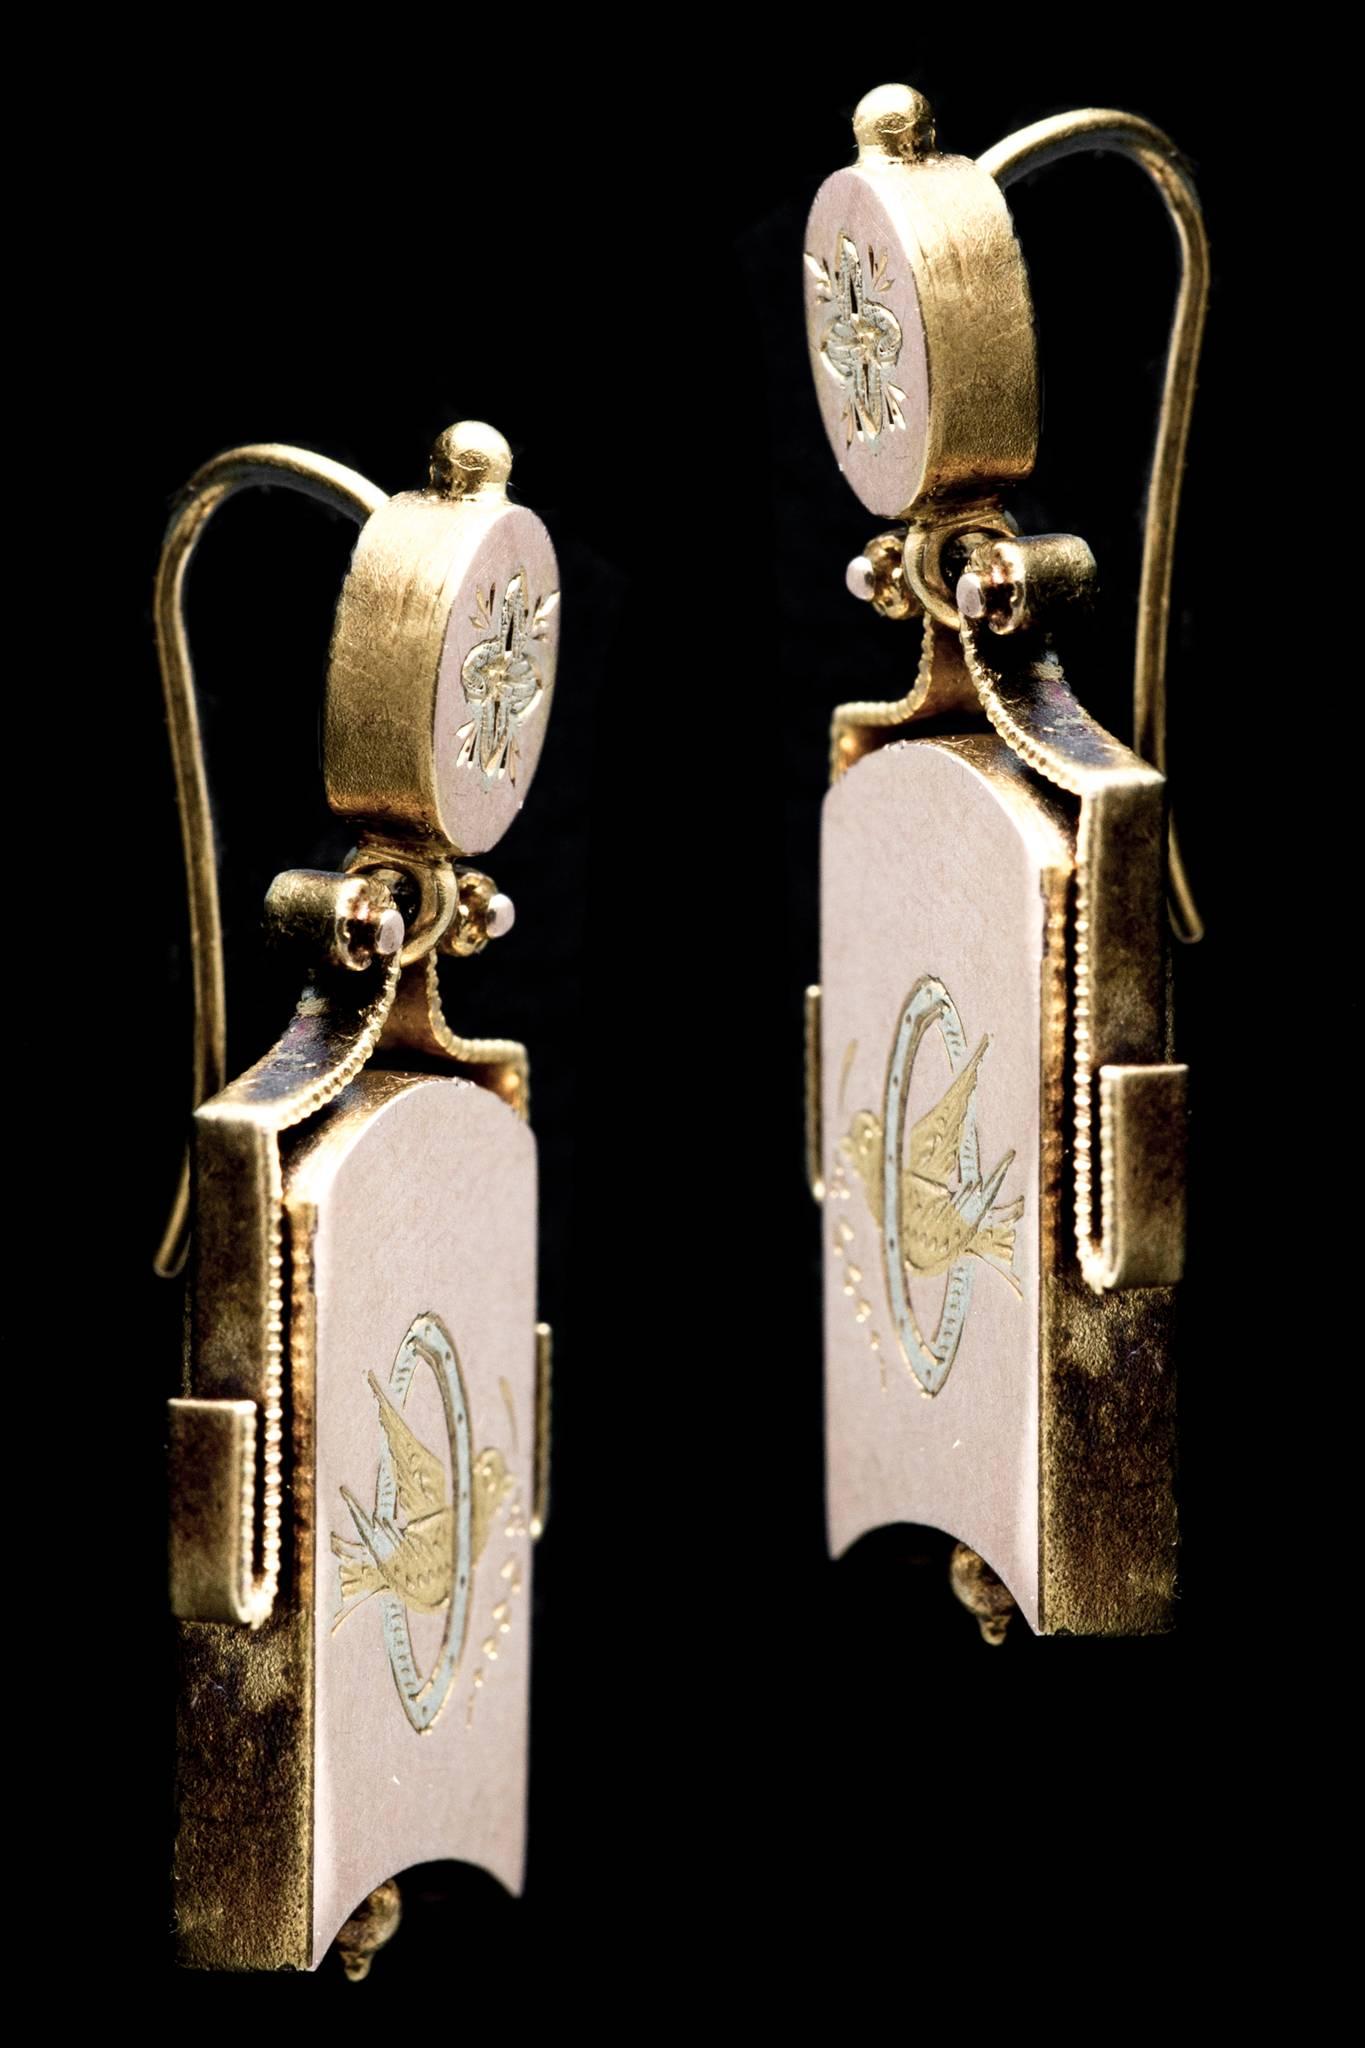 A pair of victorian period bird motif earrings in multiple colors of gold.  Crafted in yellow gold with a slight pink hue, these earrings feature accents in green, blue, and bright yellow gold~Colors not used in jewelry making since the very early